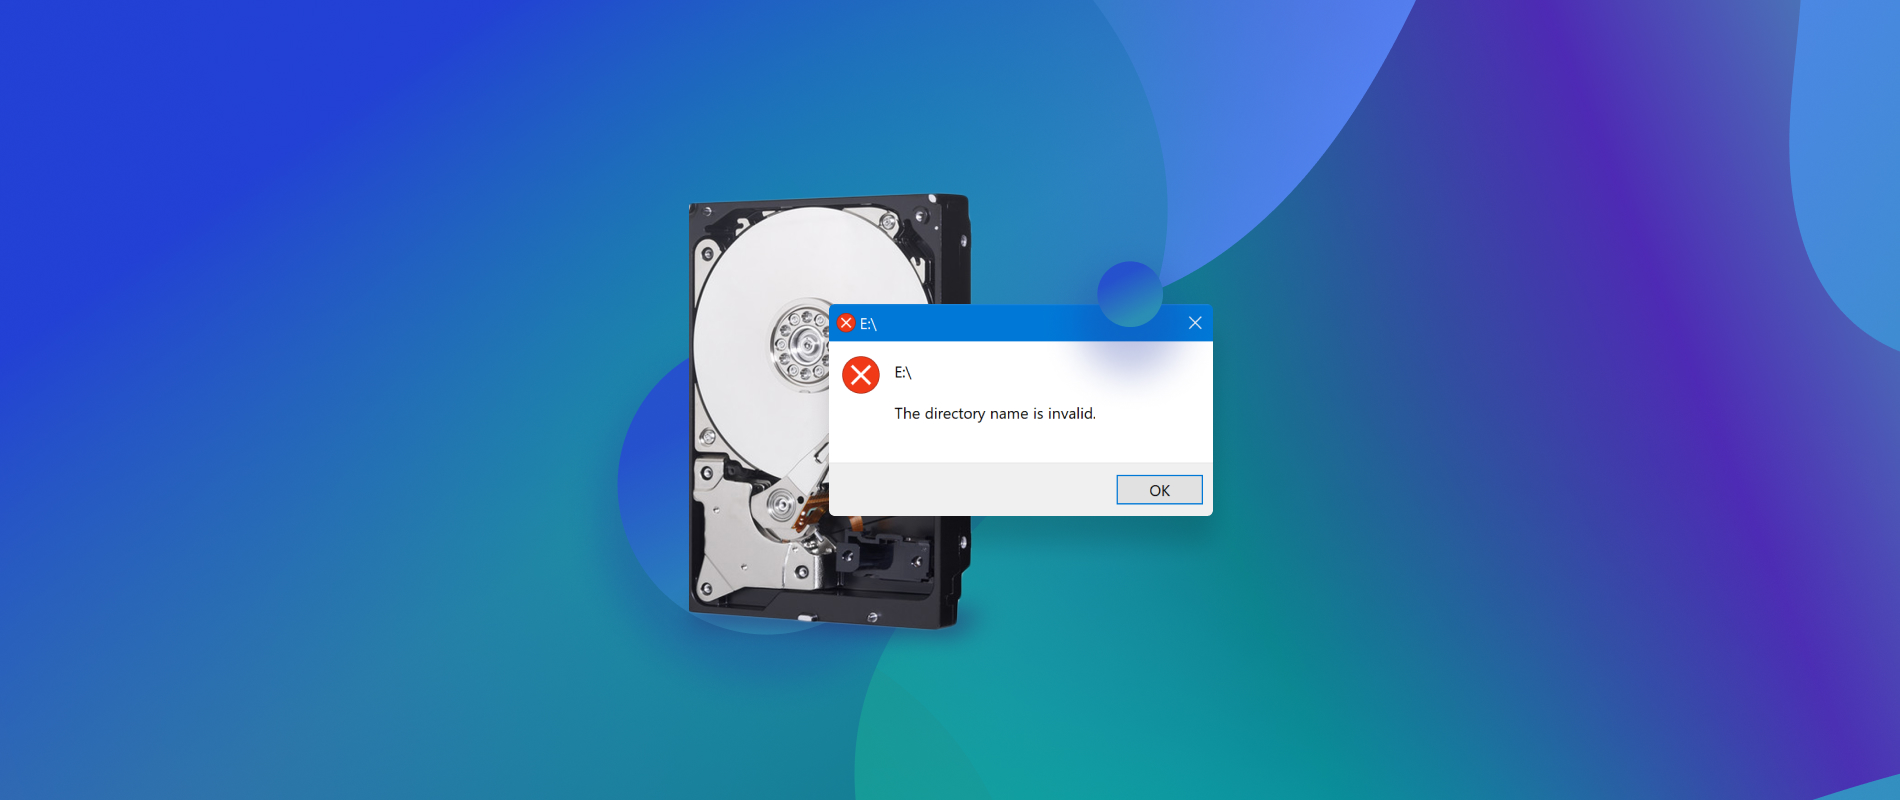 Corrupted or missing disk drivers
Incorrect disk configurations